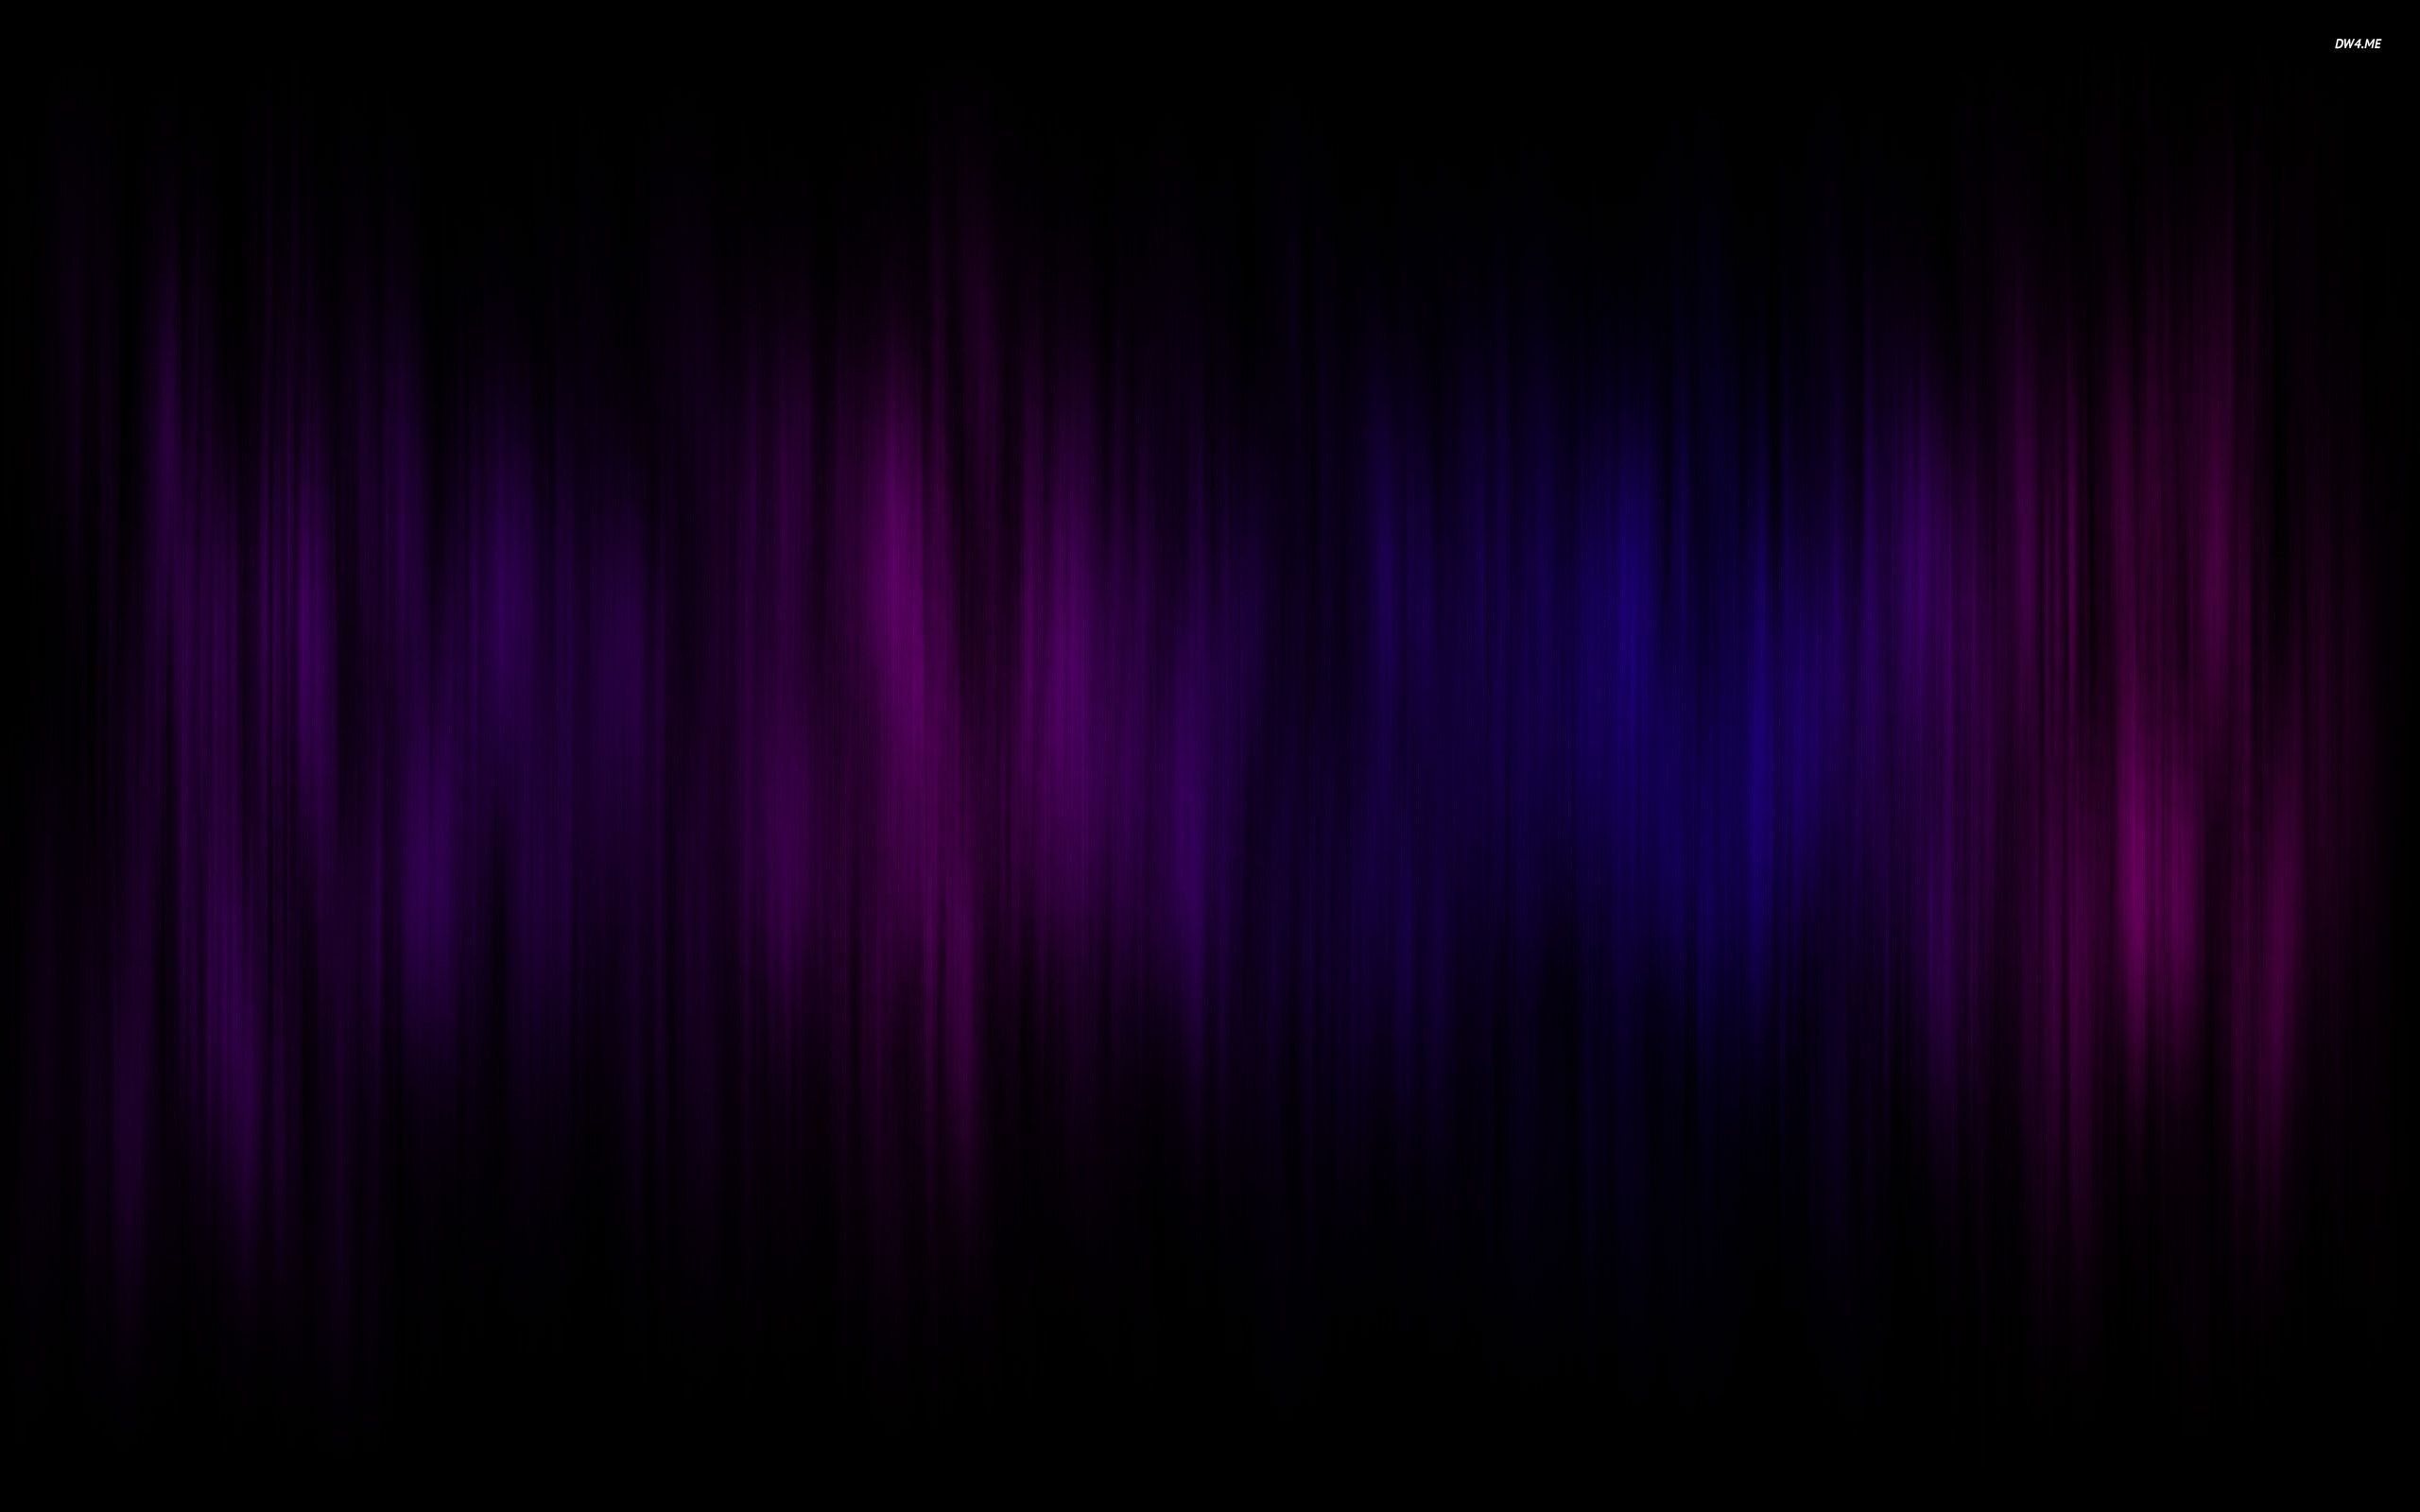 Tags: Black Purple. Category: Backgrounds